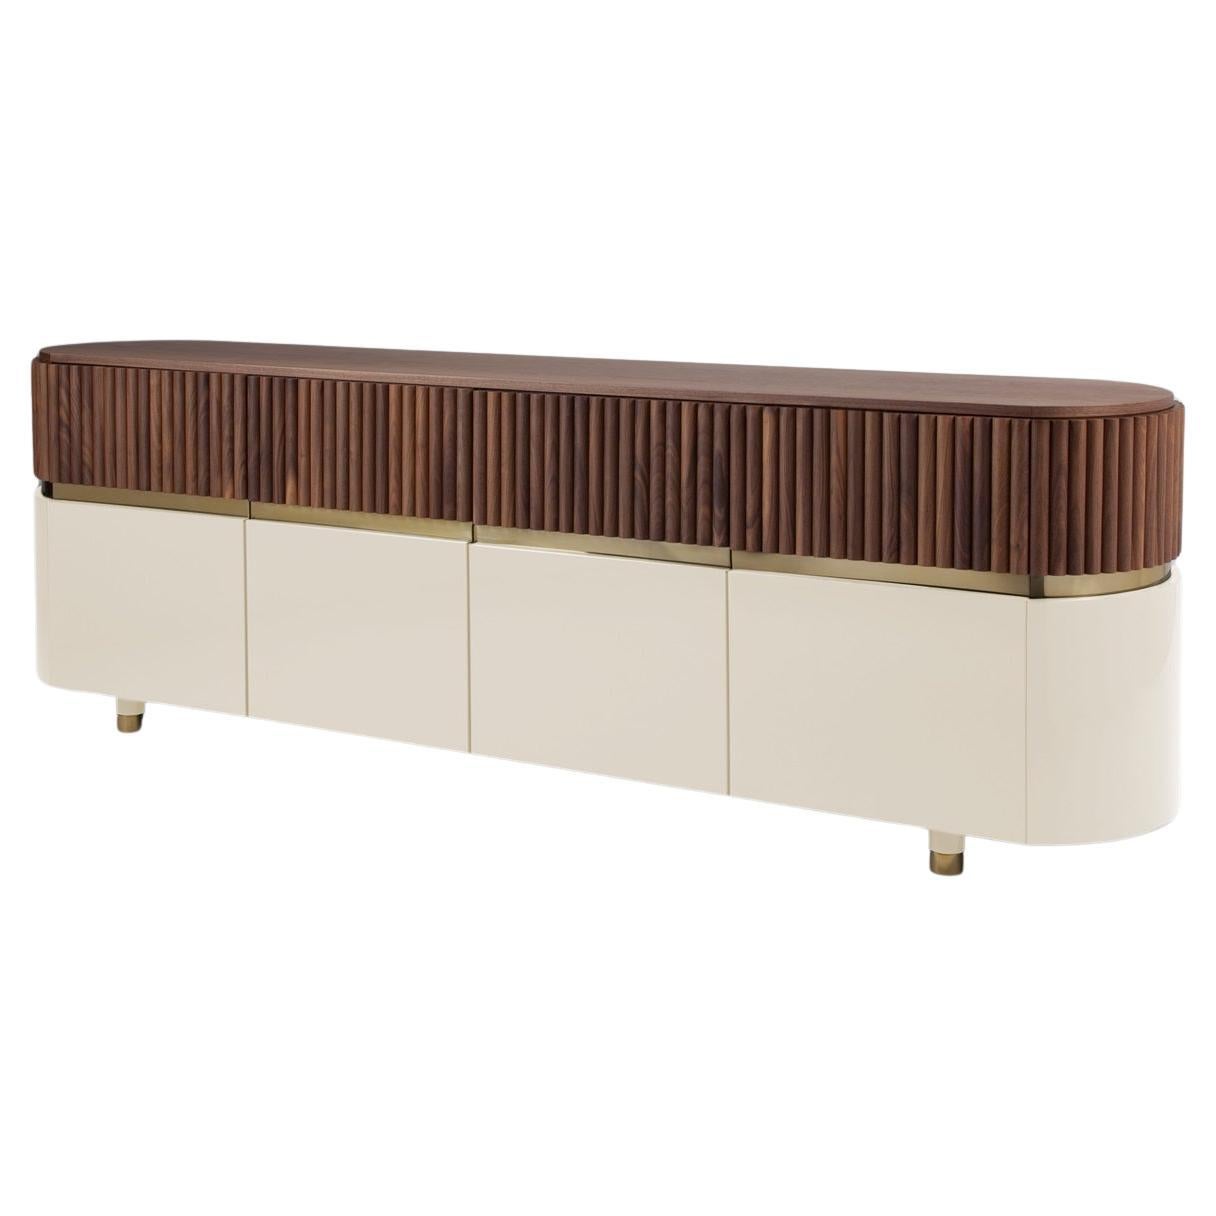 DOOQ Buffet Sideboard Berlin in Natural Walnut, Polished Brass, Ivory For Sale